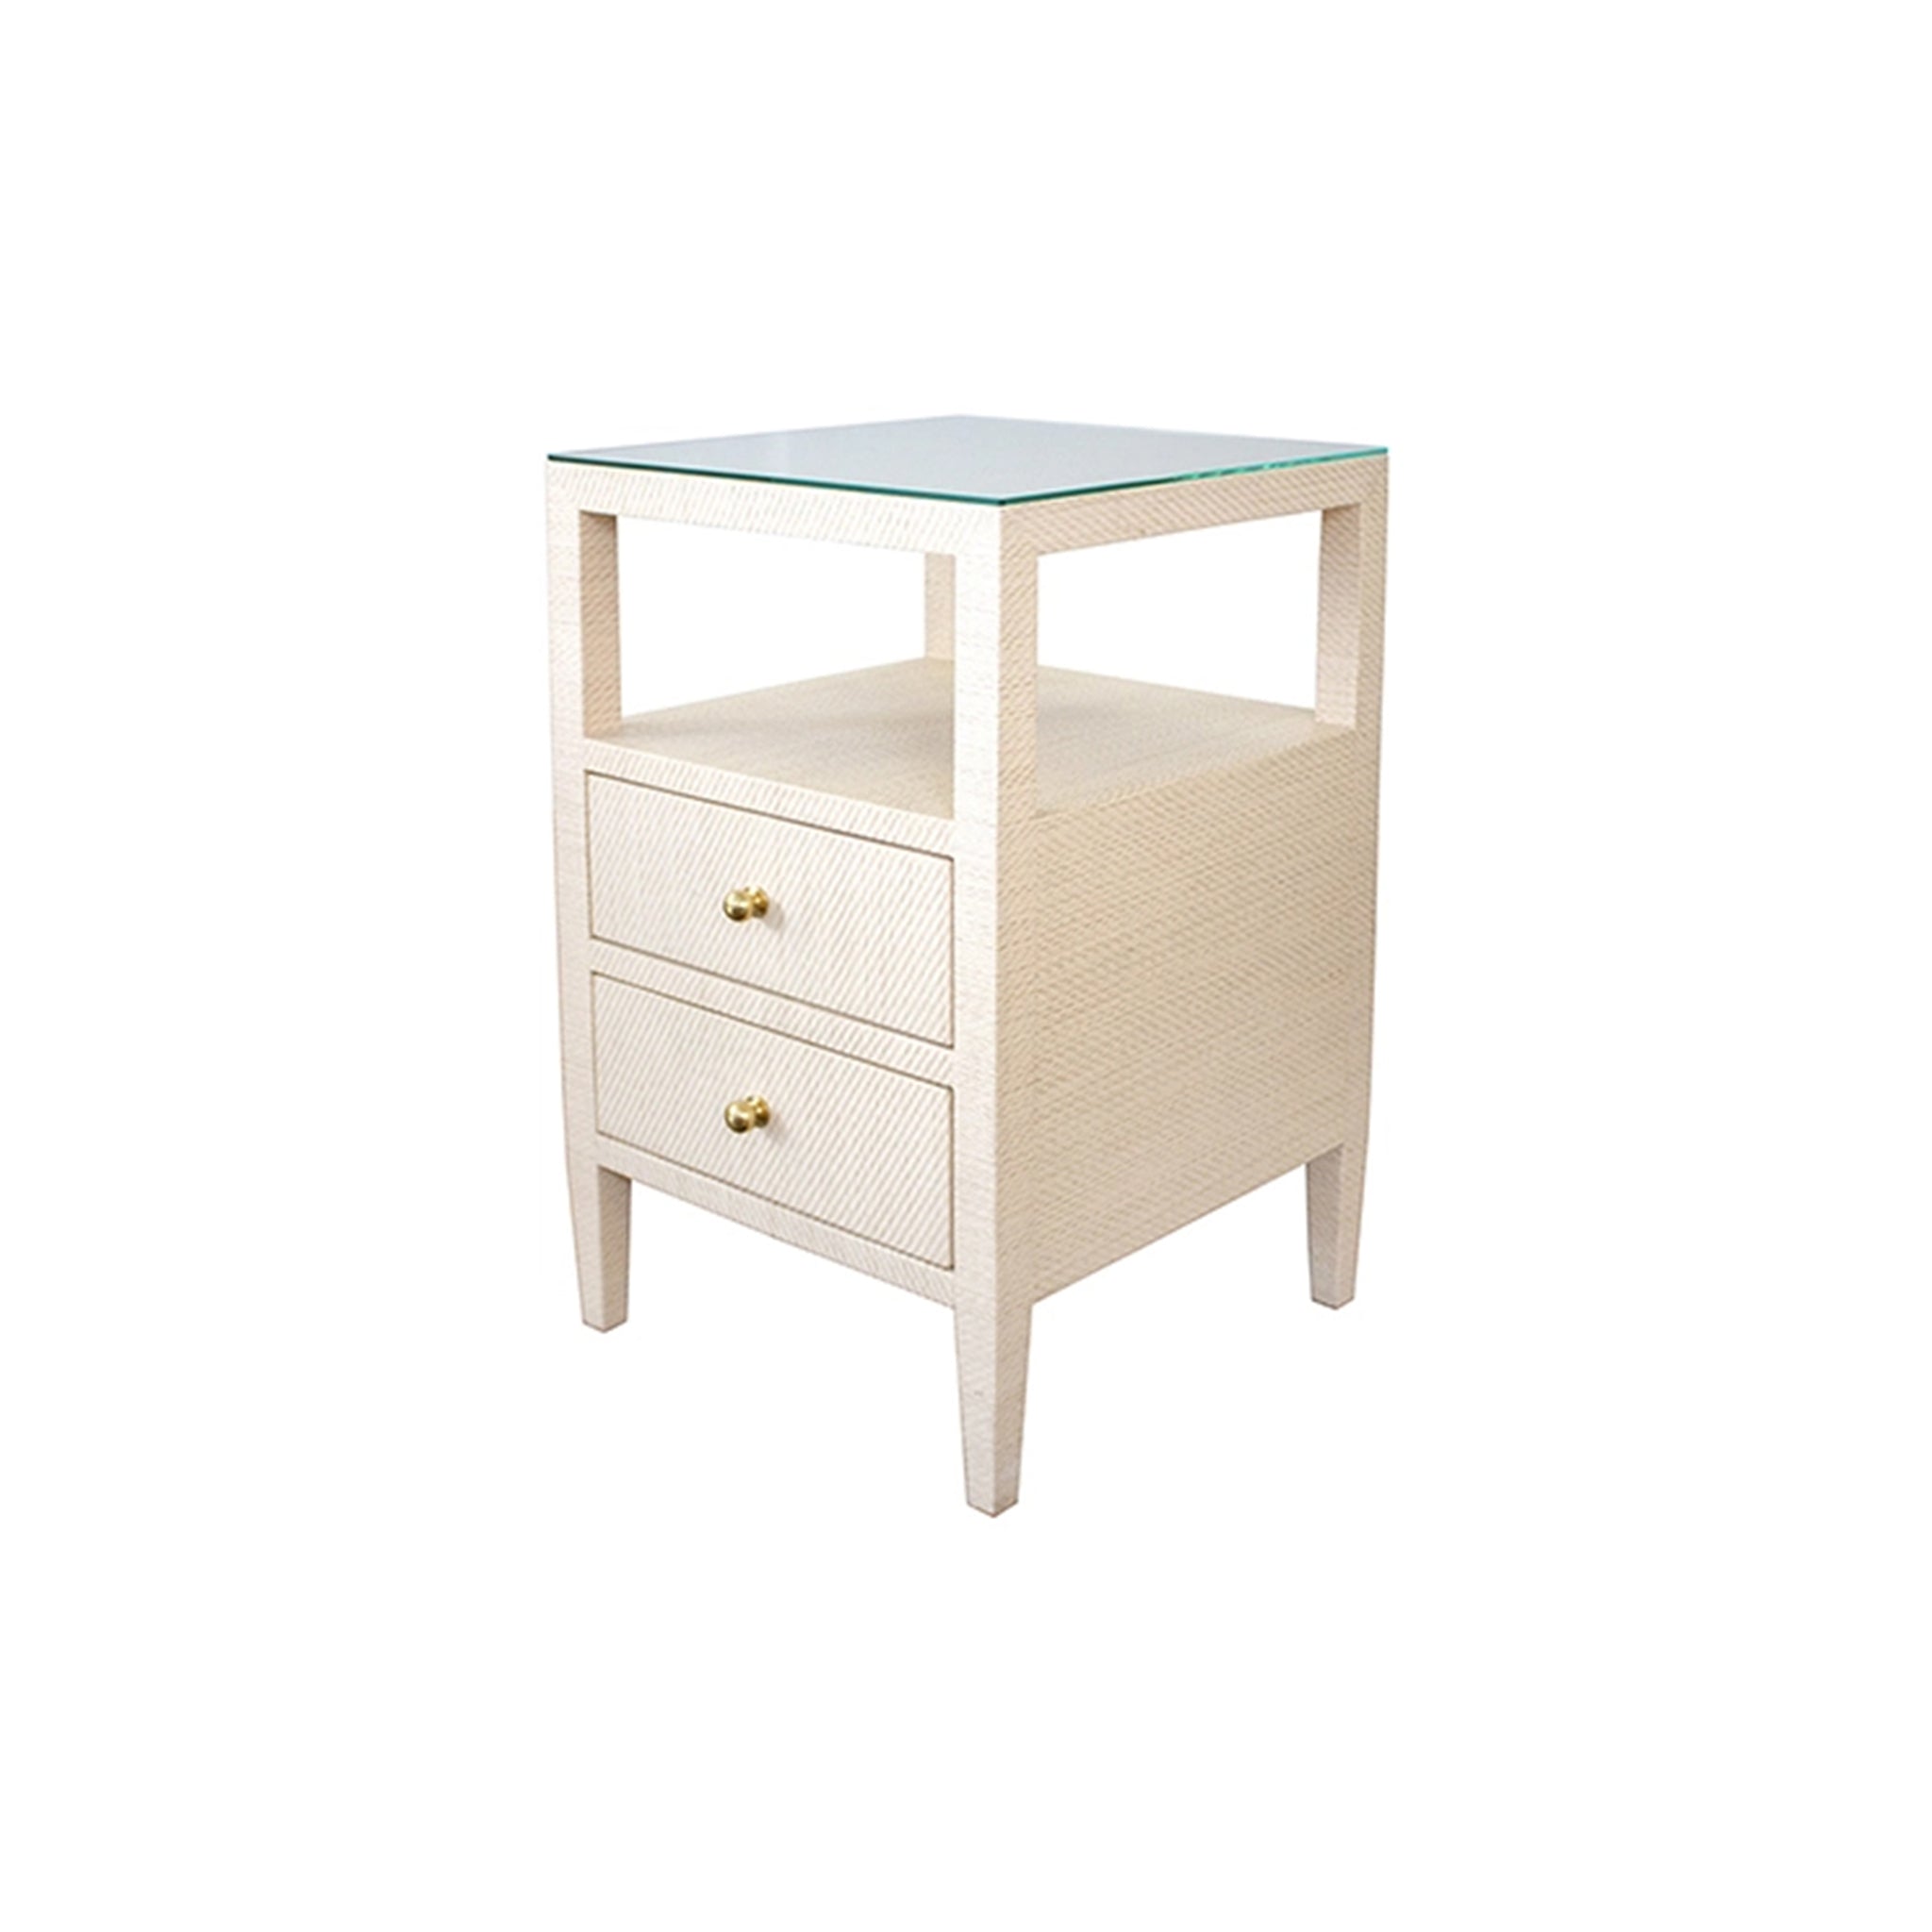 Darby Side Table